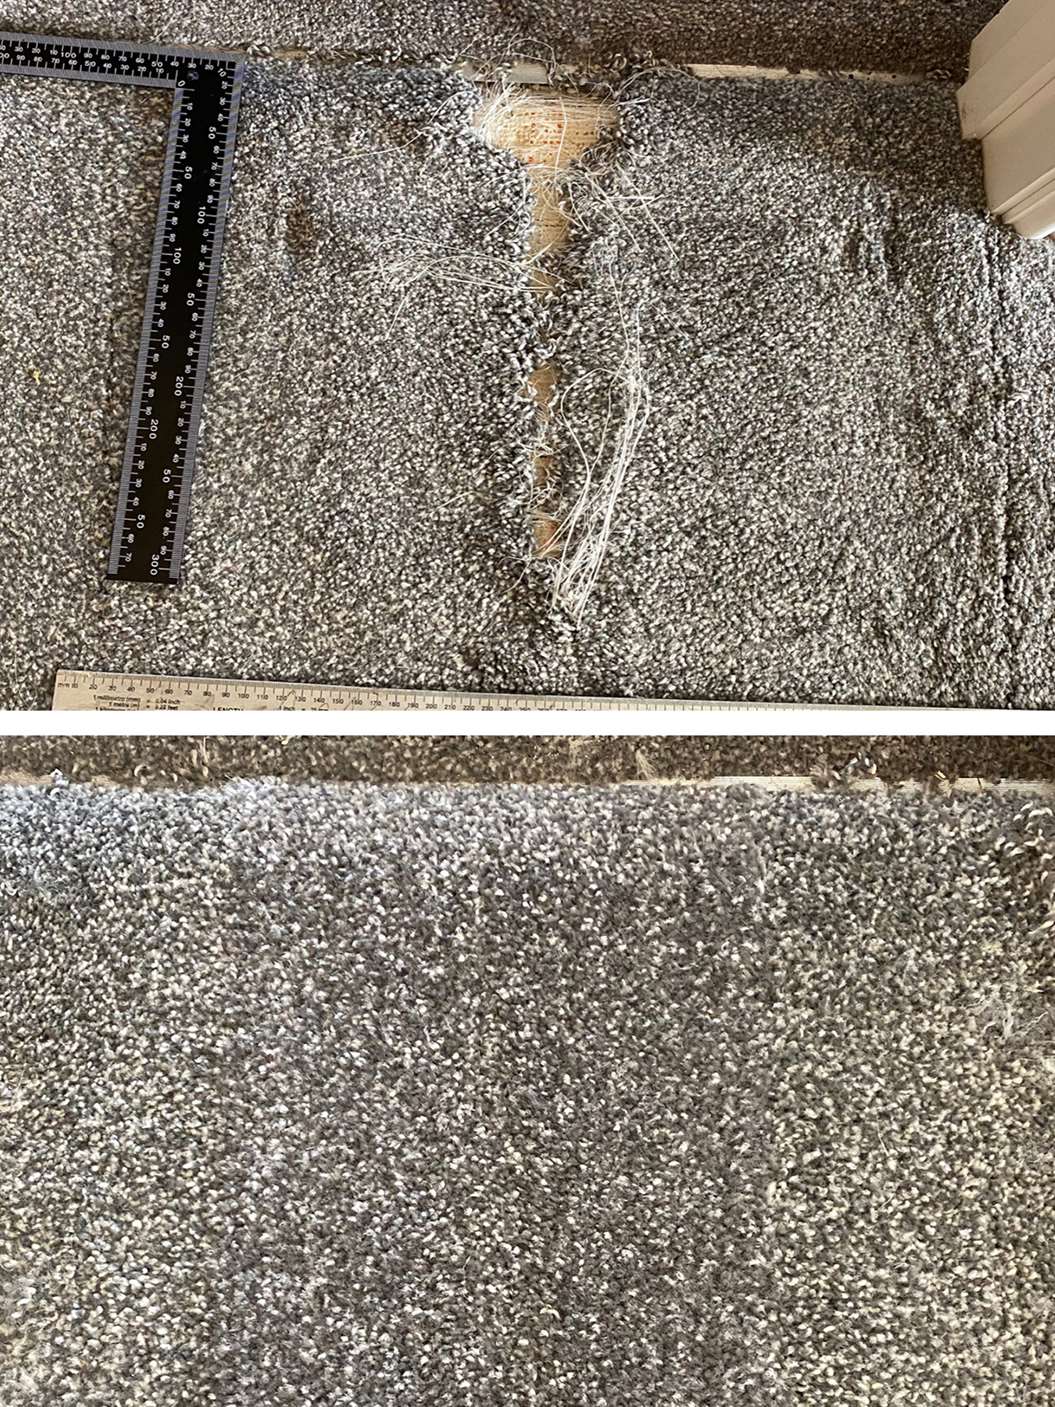 Before and after carpet repairs images.